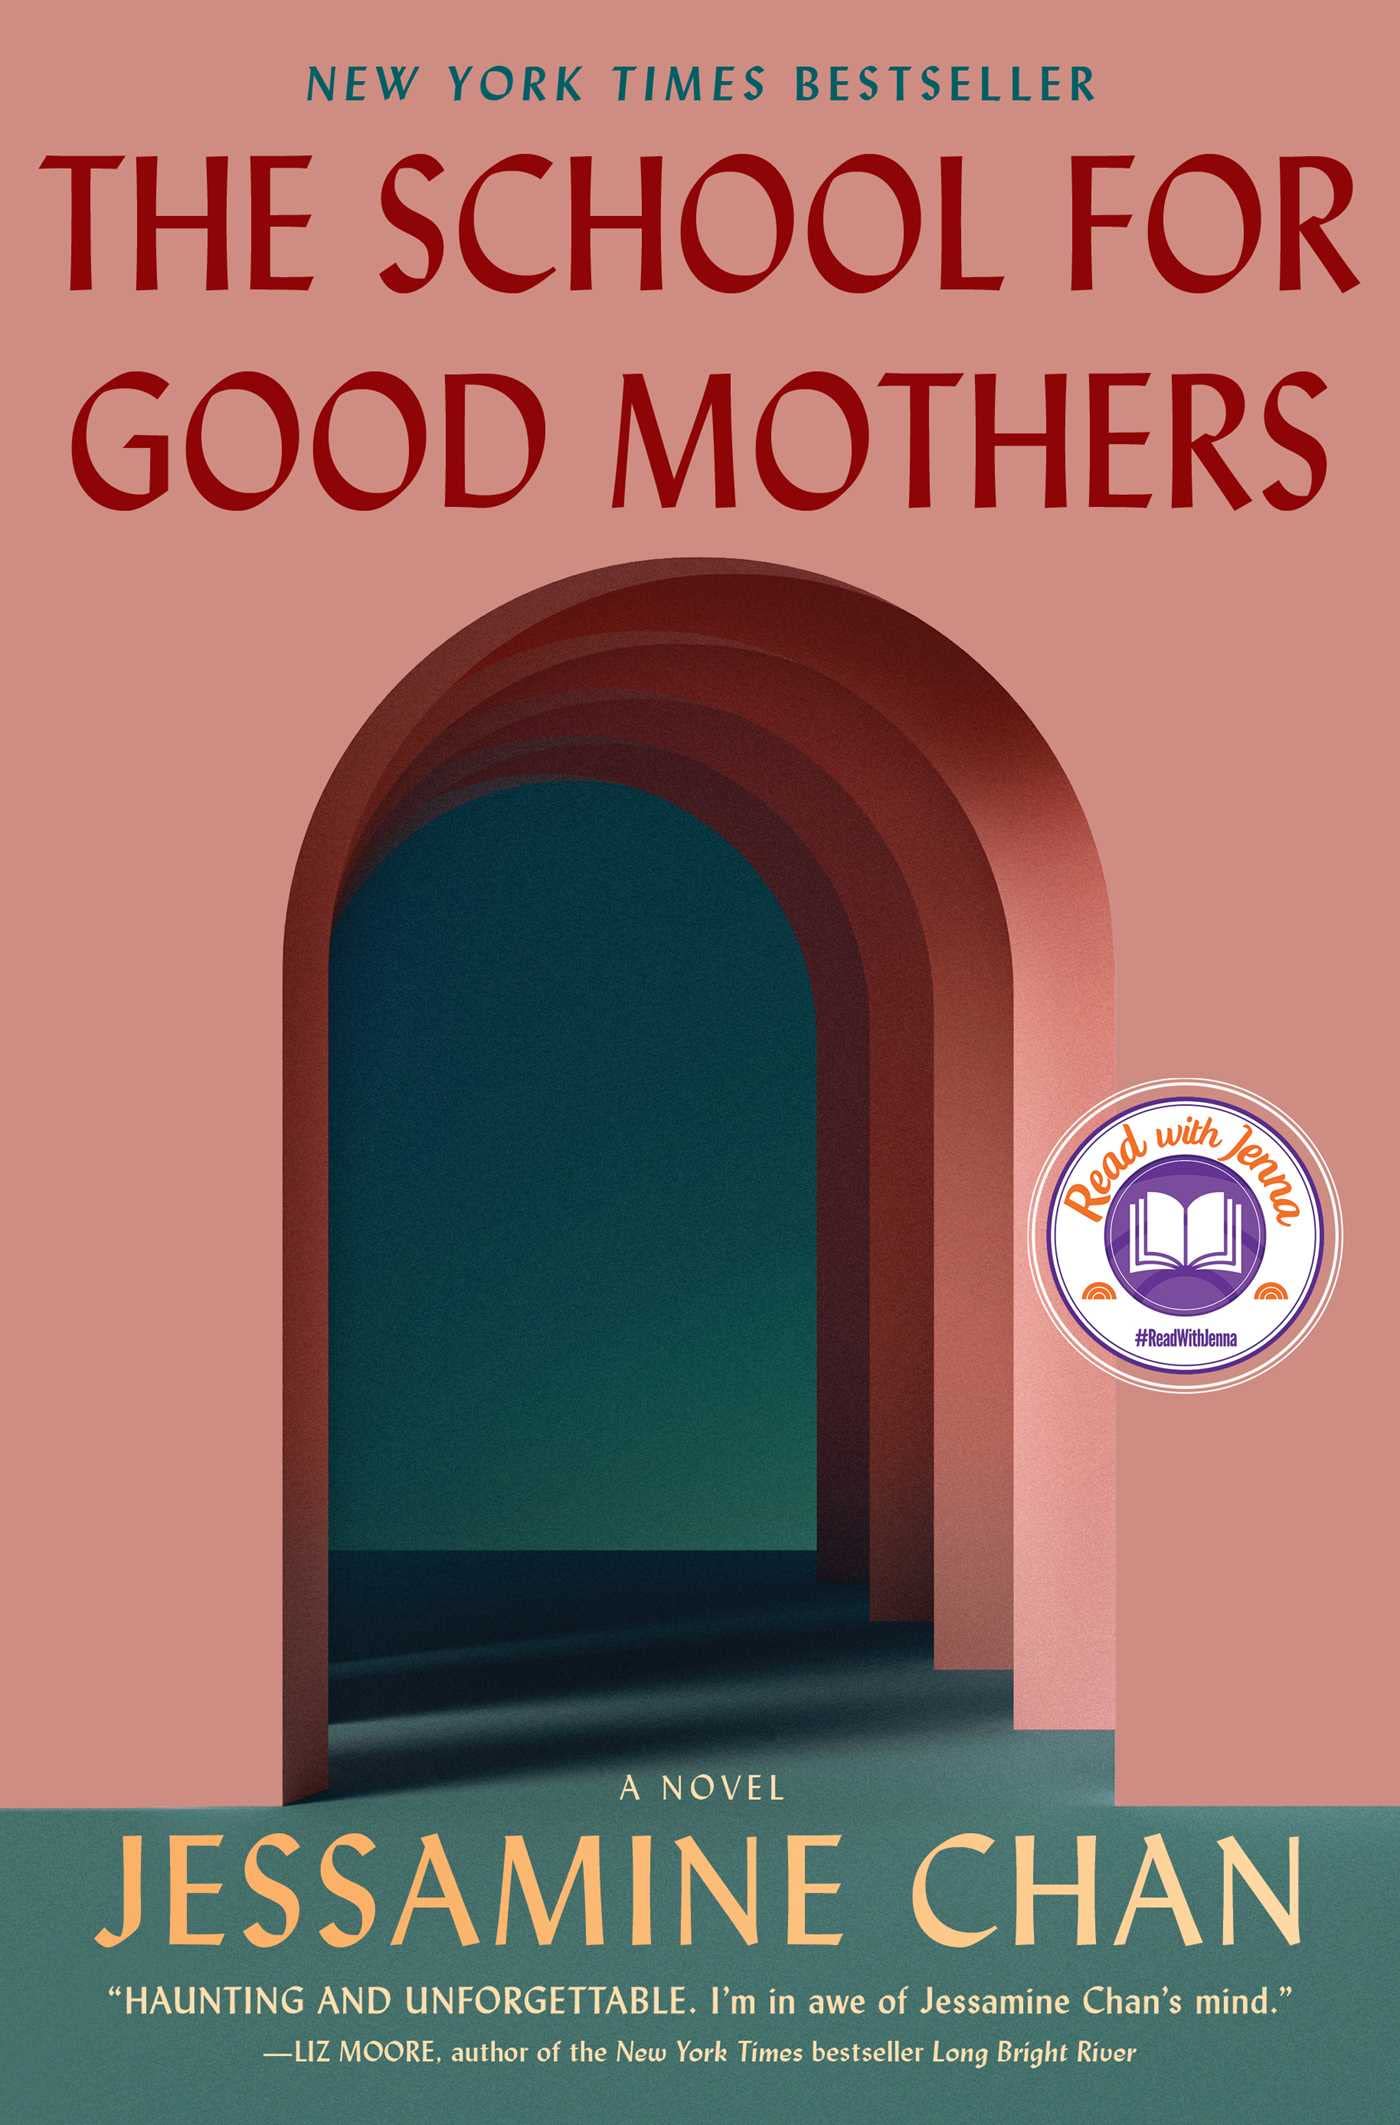 Jessamine Chan's The School for Good Mothers book cover